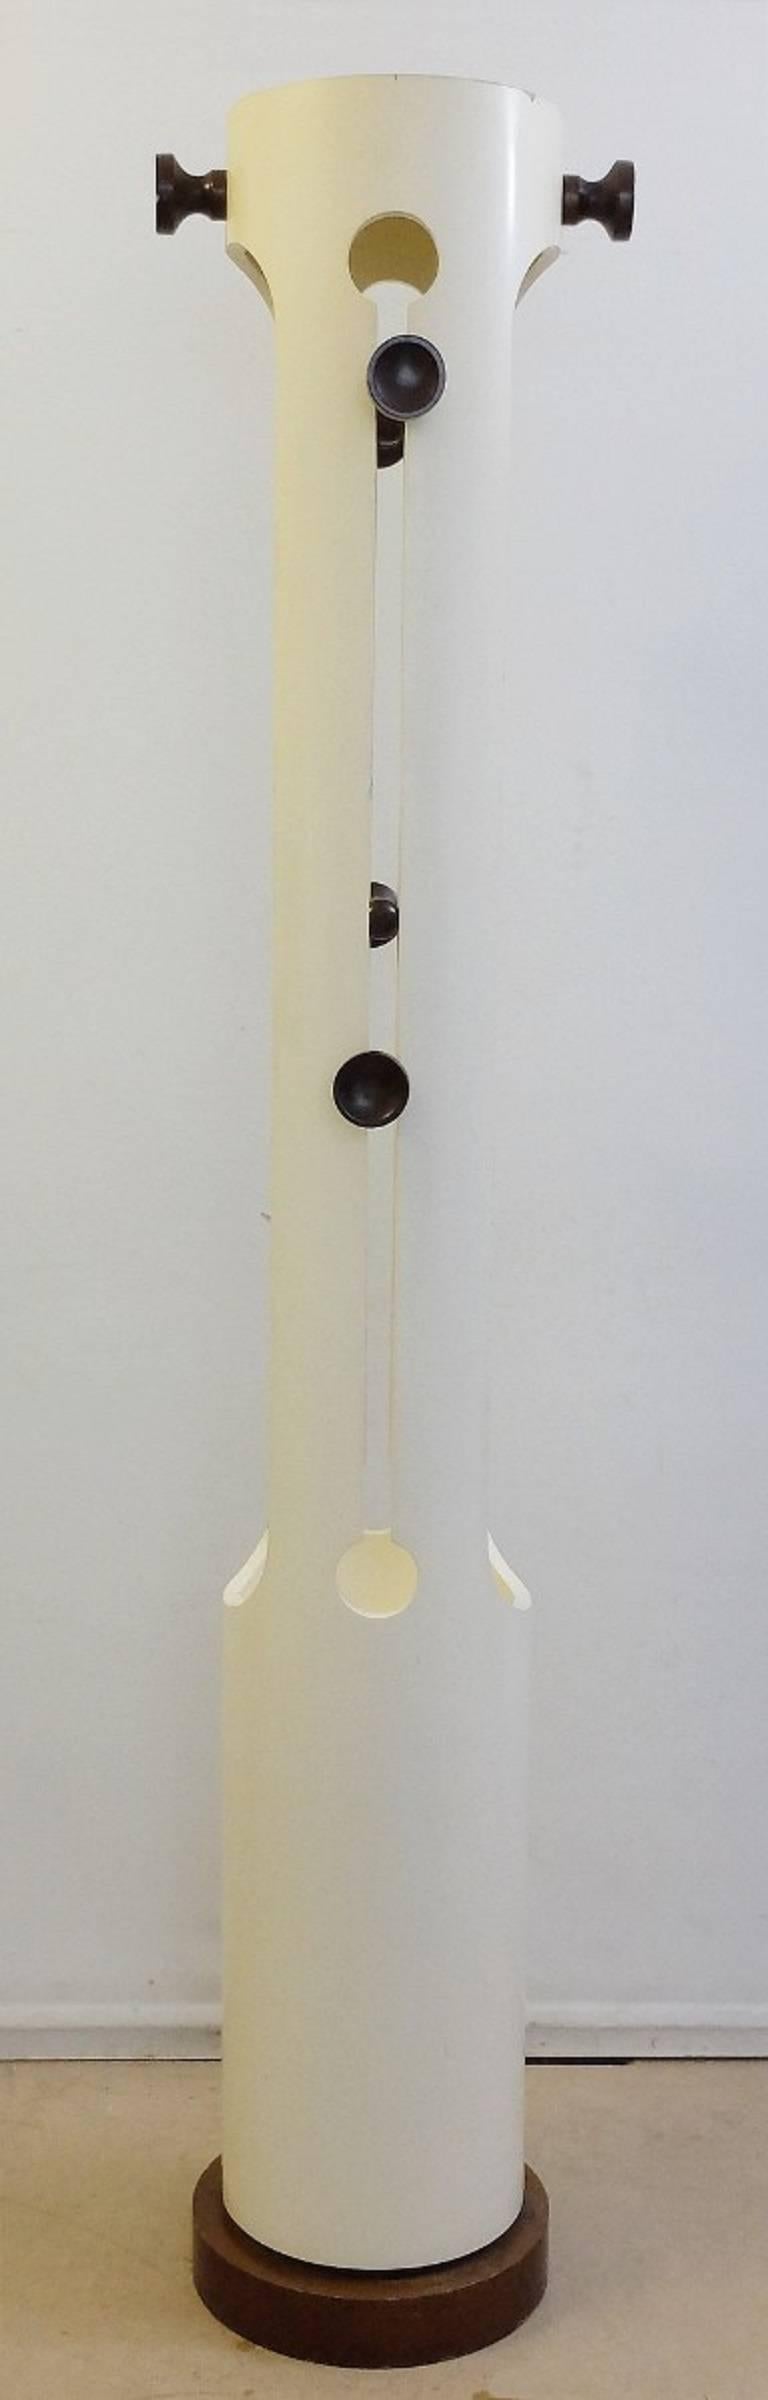 Italian TOTEM shaped coat rack in lacquered wood attributed to Carlo De Carli, circa 1960.